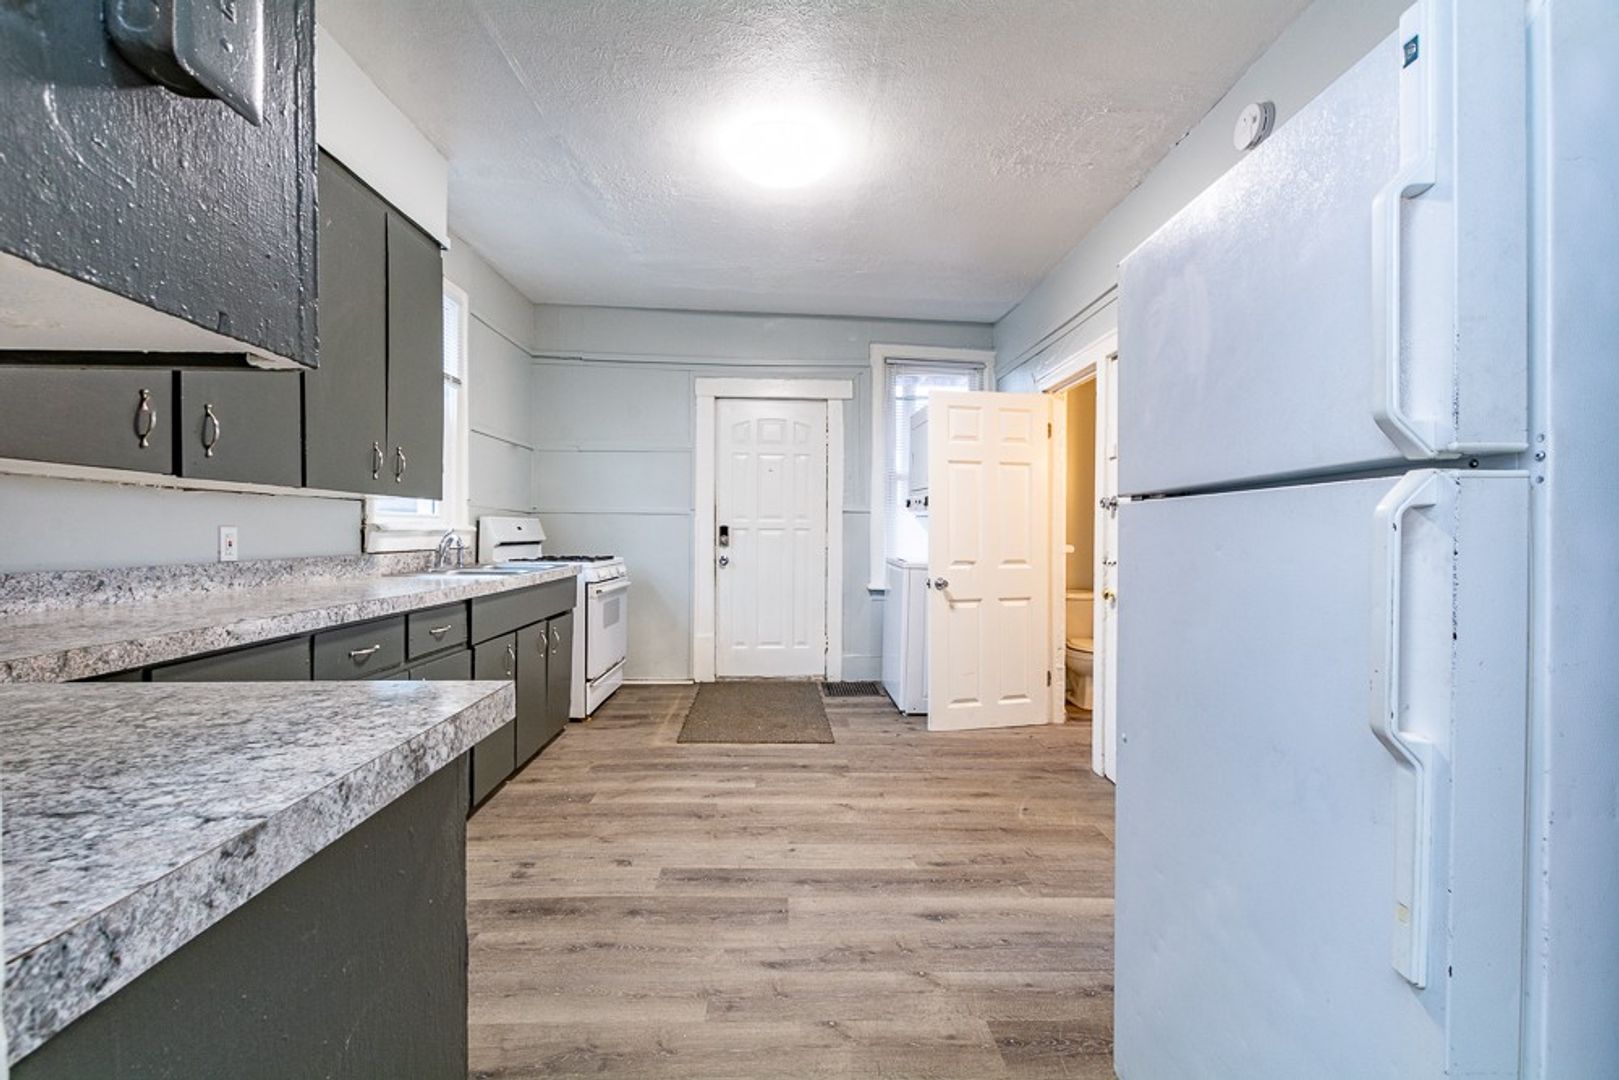 Two Bedroom Near Bridge Street with Washer/Dryer in Unit!